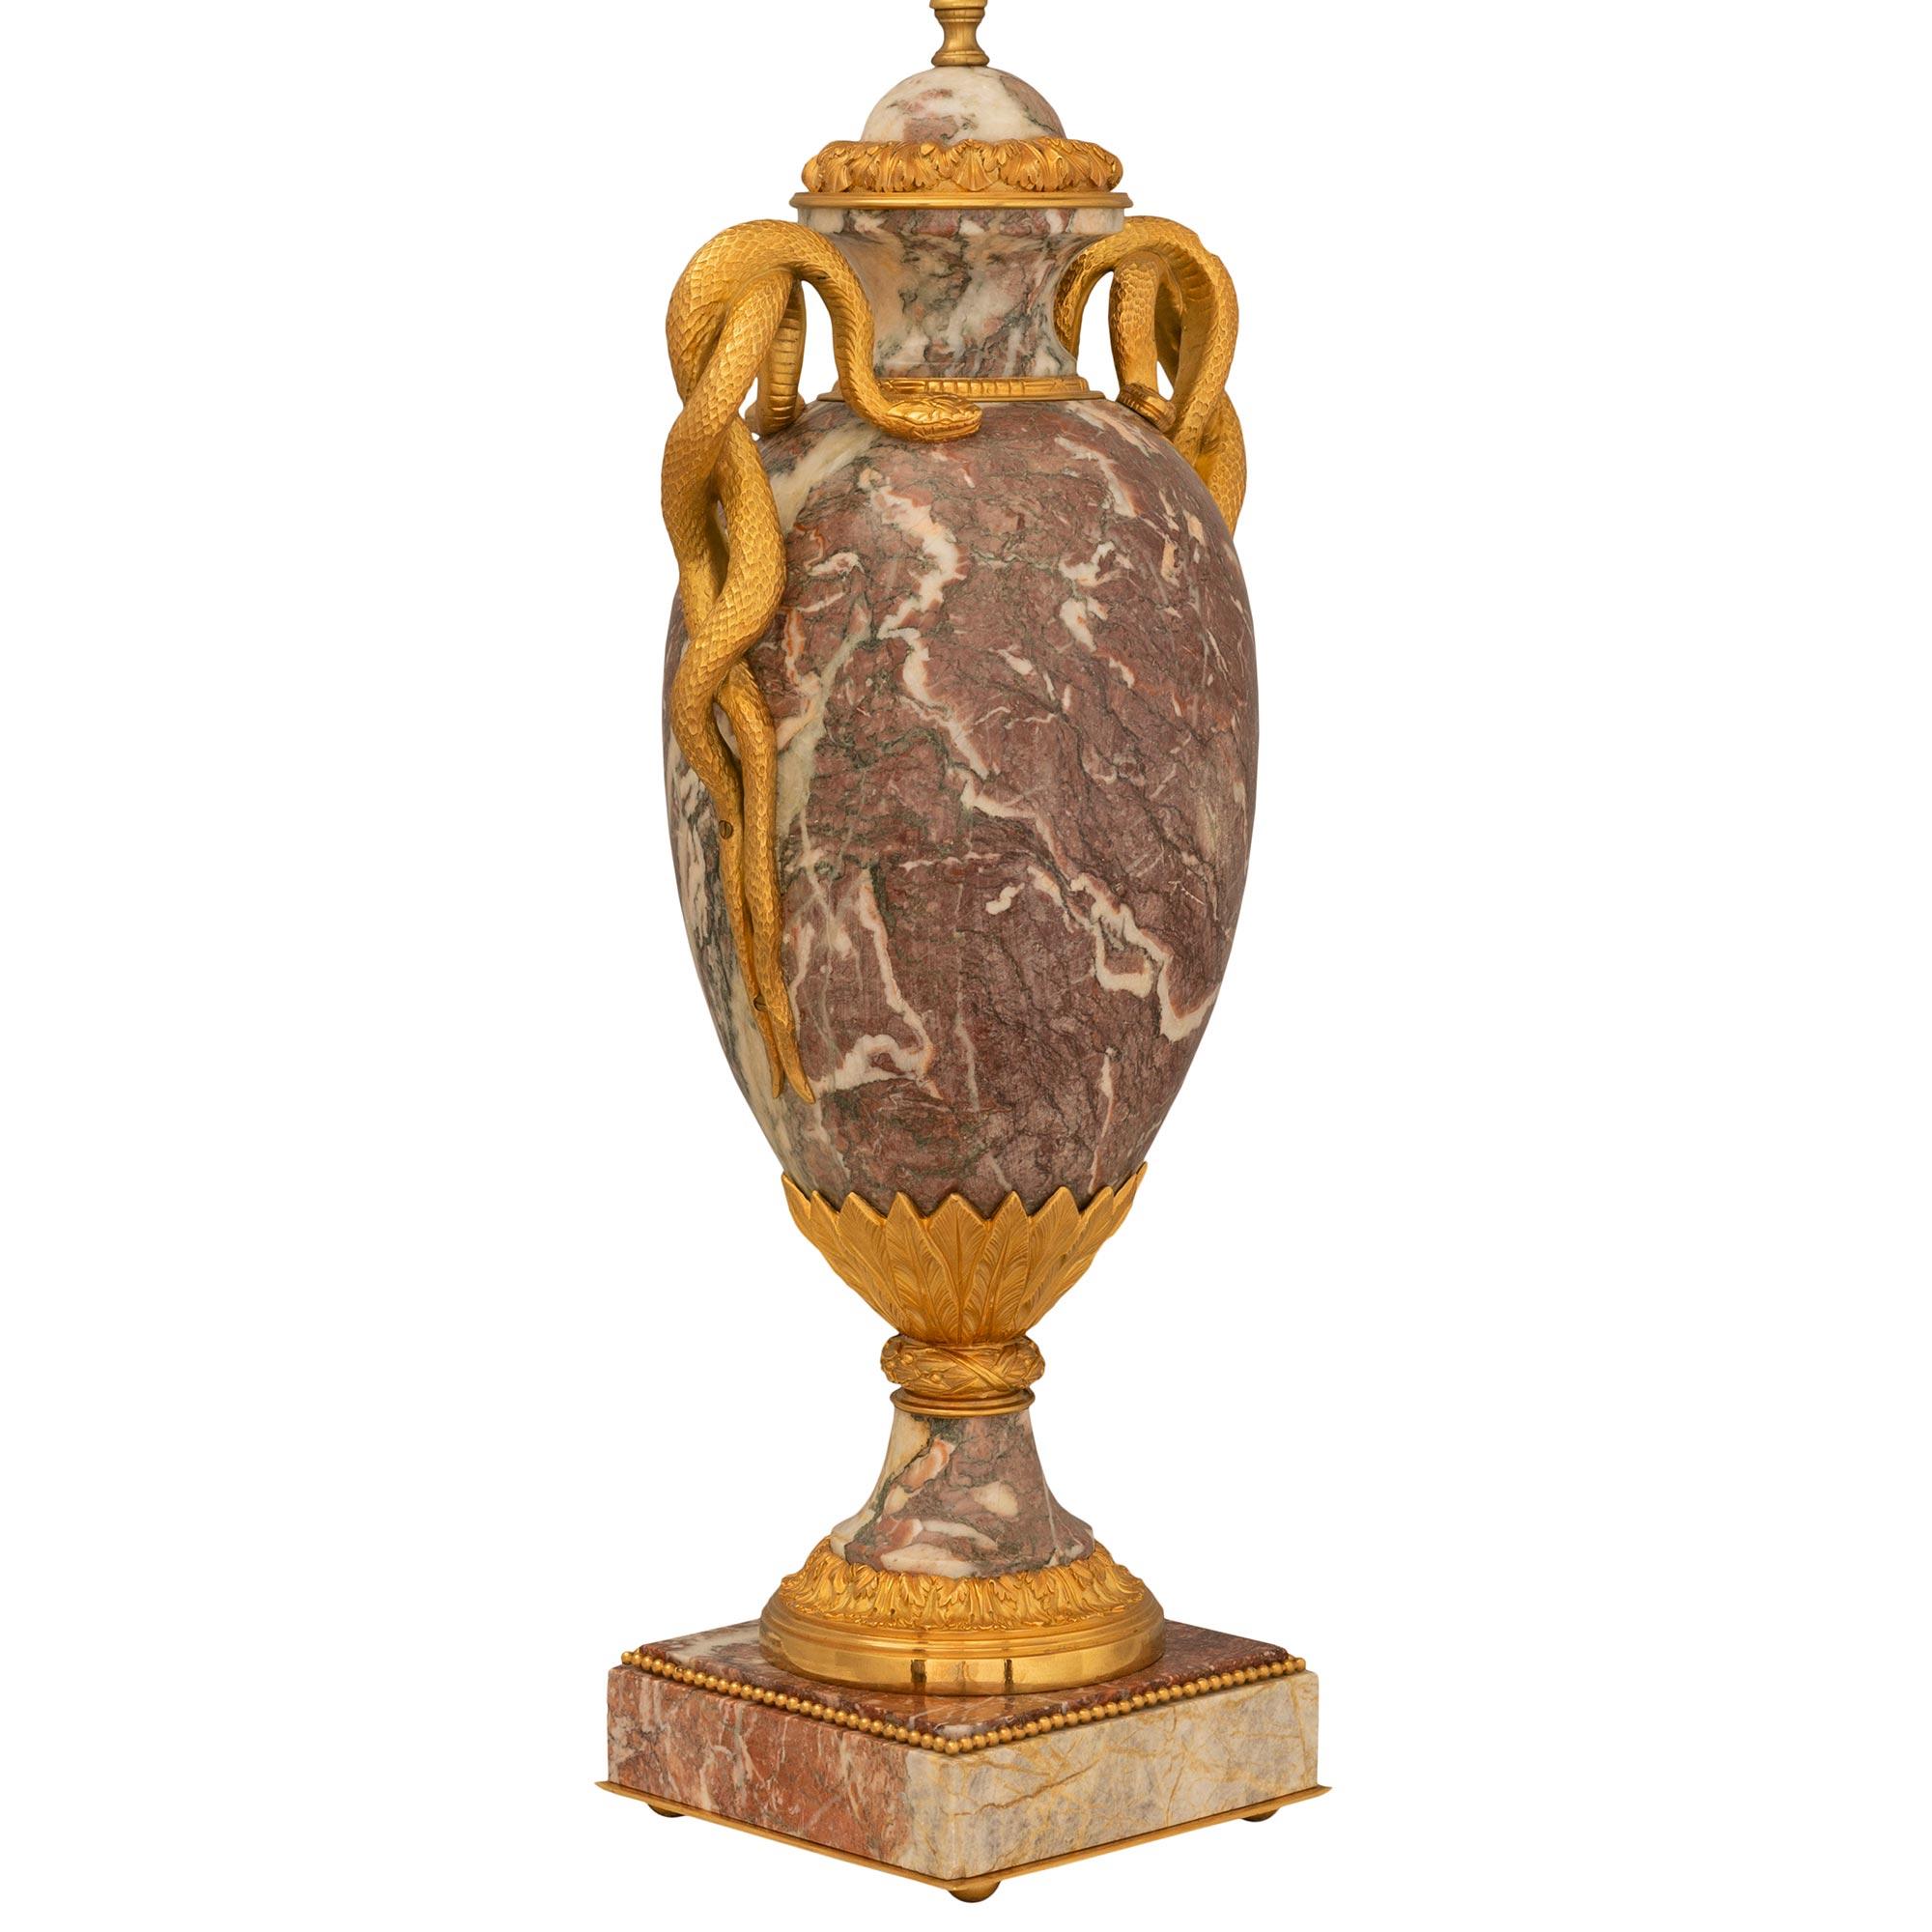 A stunning and very high quality pair of French 19th century Louis XVI st. Brèche Violette marble and ormolu lamps. Each large scale lamp is raised by a square base with fine ormolu ball feet, a lovely bottom fillet, and a delicate wrap around